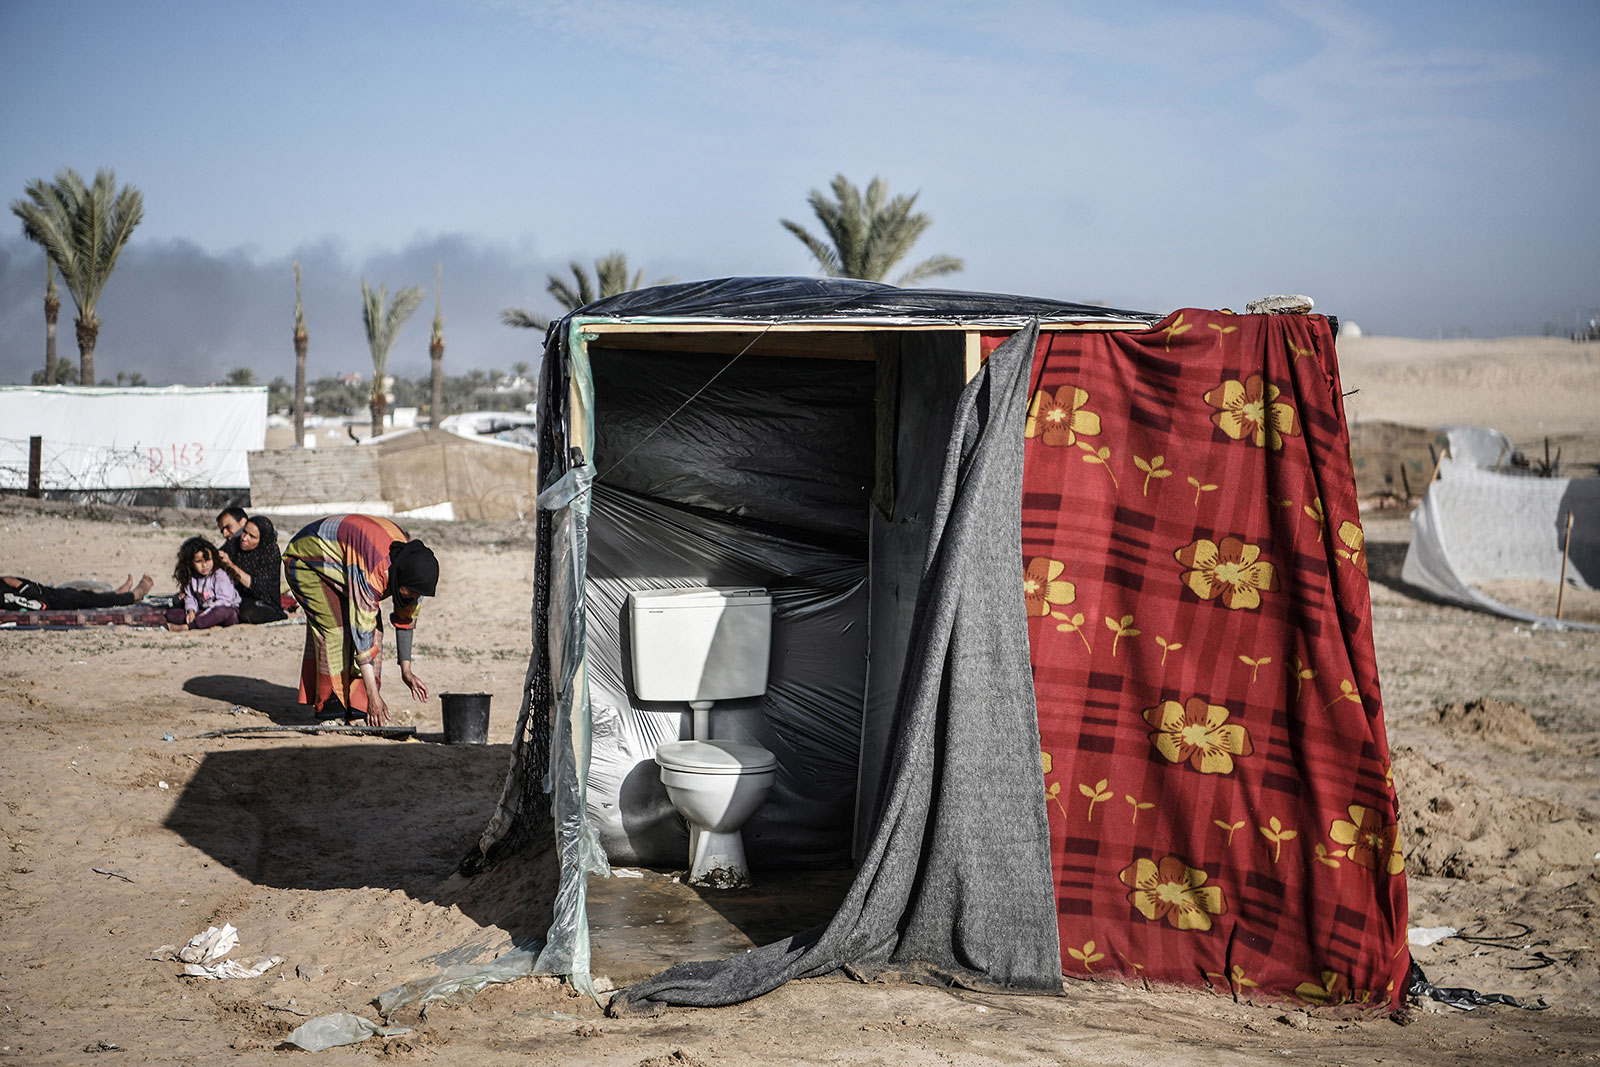 A view of a toilet in a tent near the Egyptian border in Rafah, Gaza on January 22.